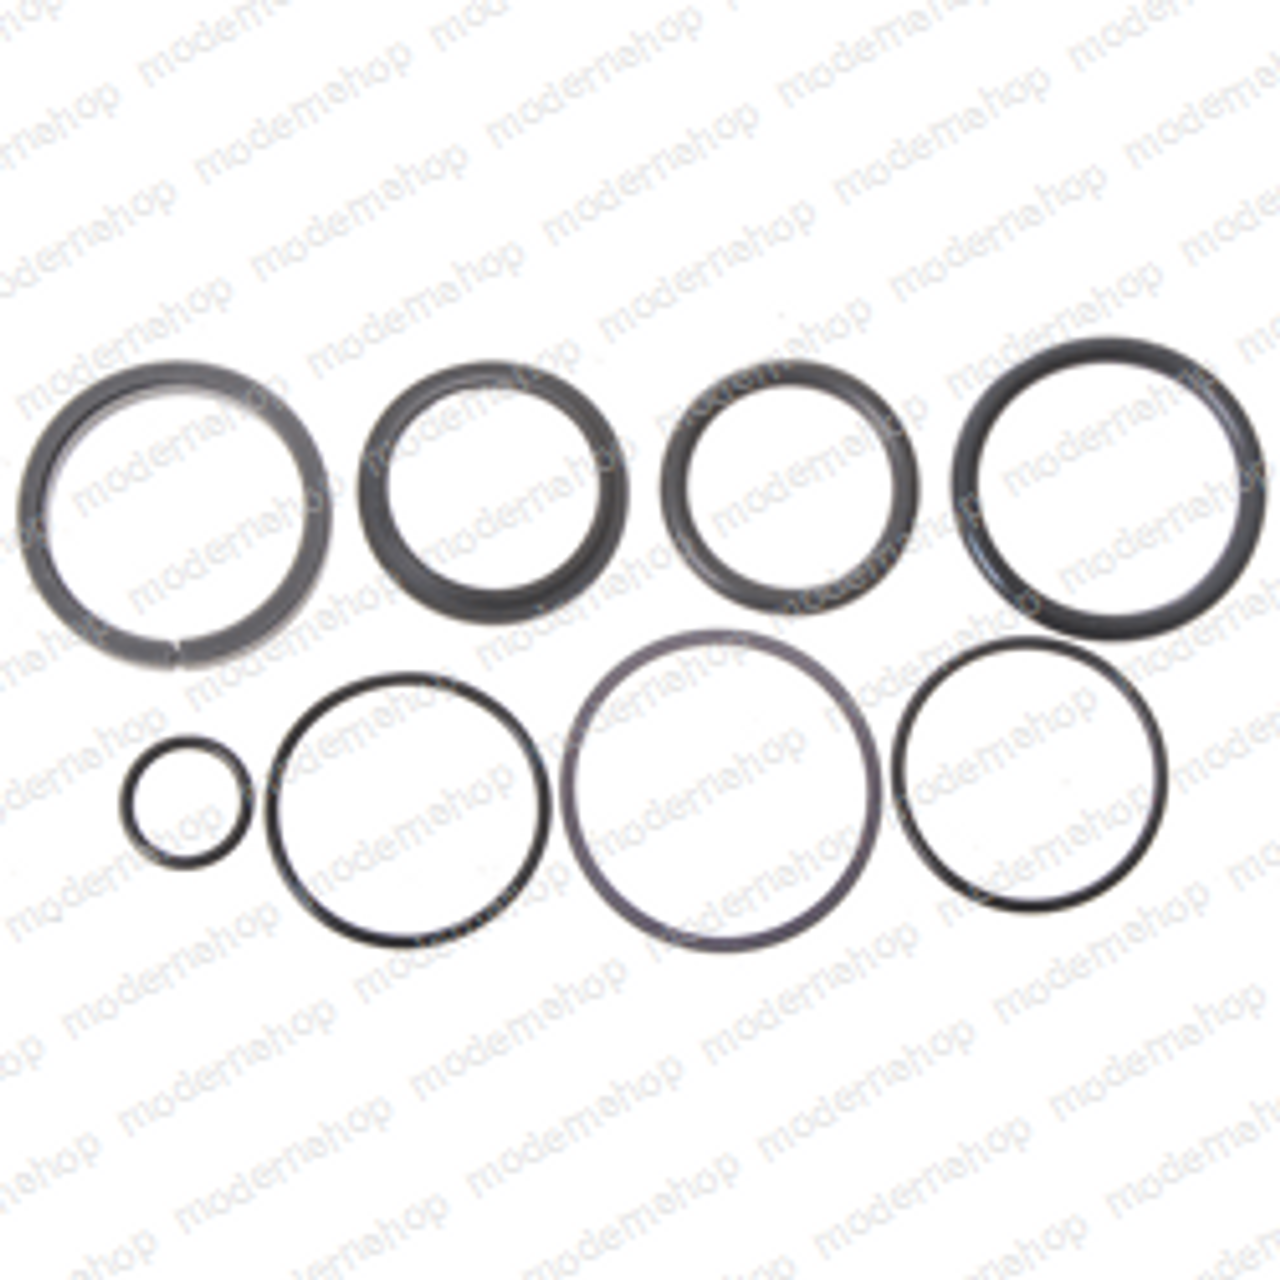 2012: Strato-Lift SEAL KIT - STEERING CYLINDER